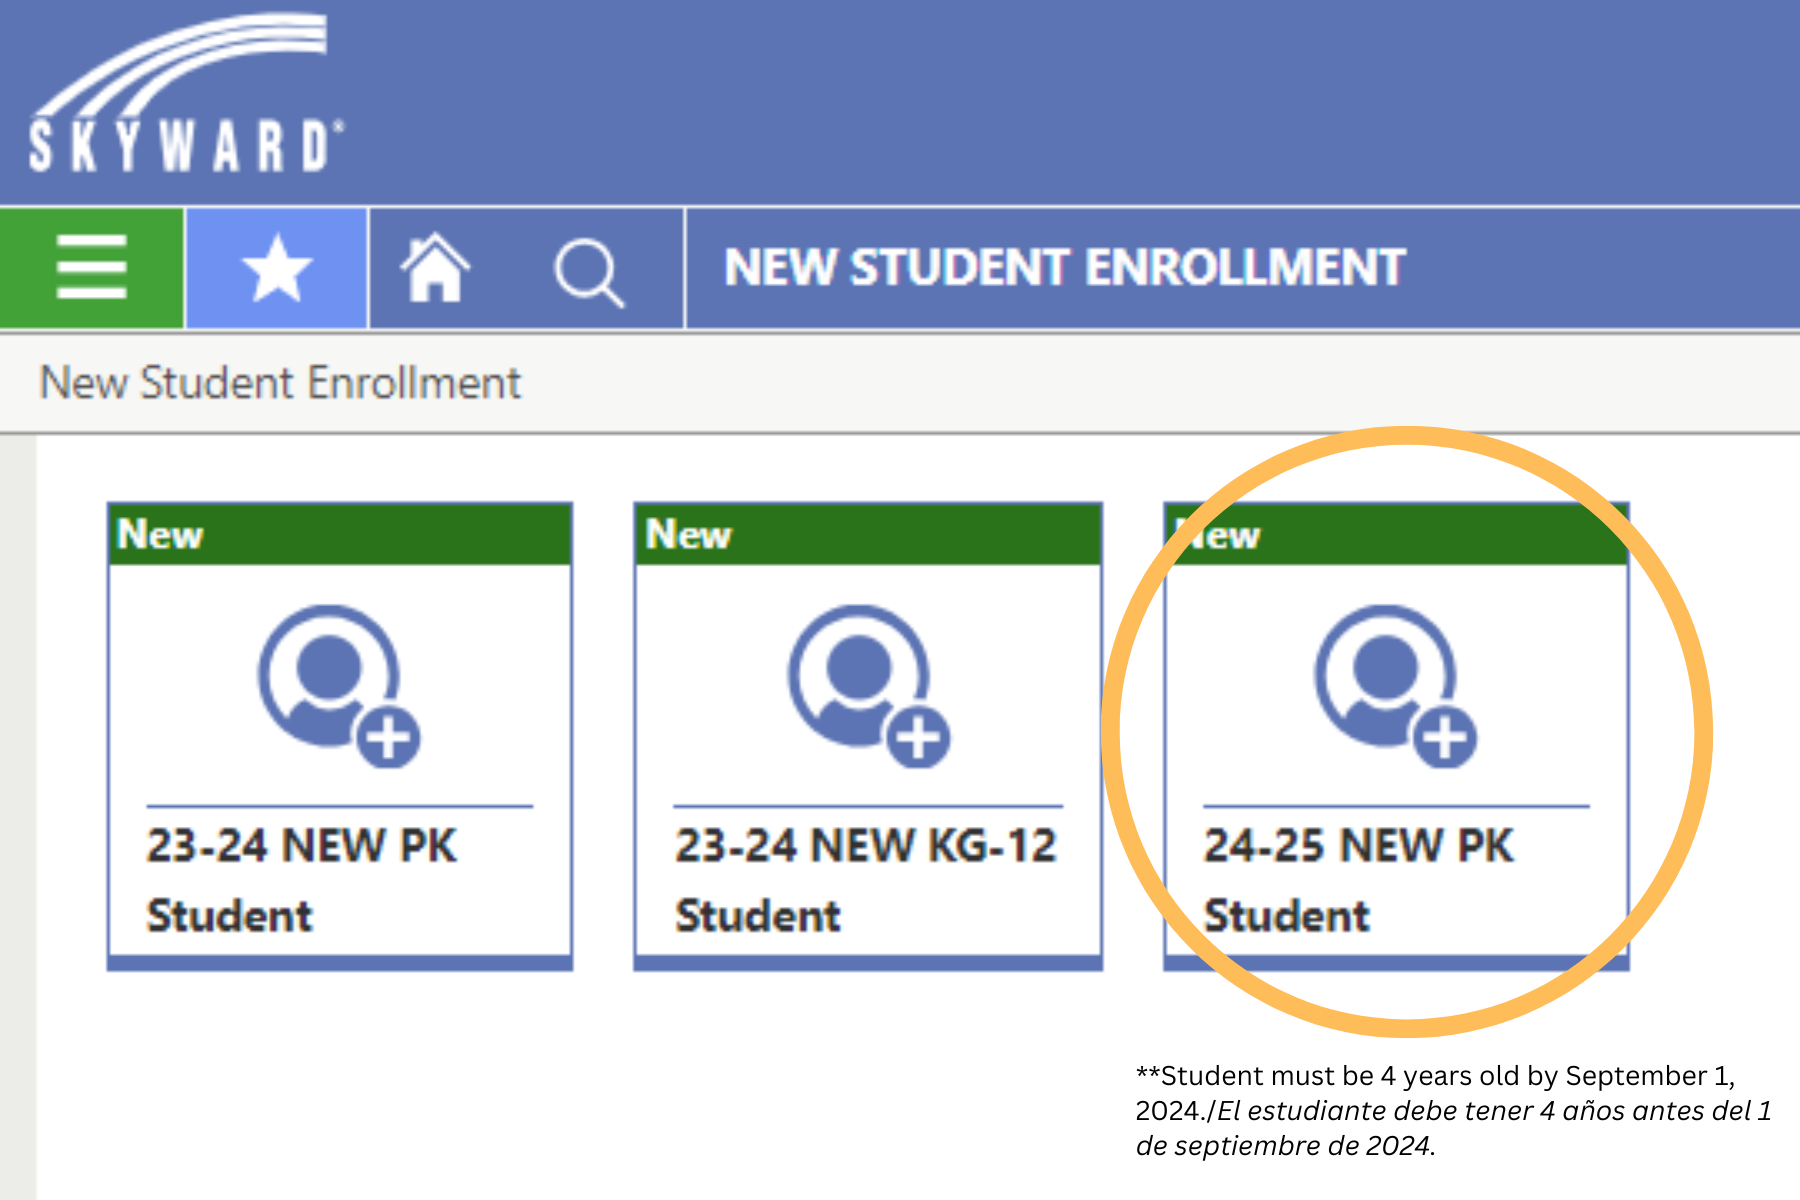 Once logged in to Skyward, click this form to complete PreK registration.